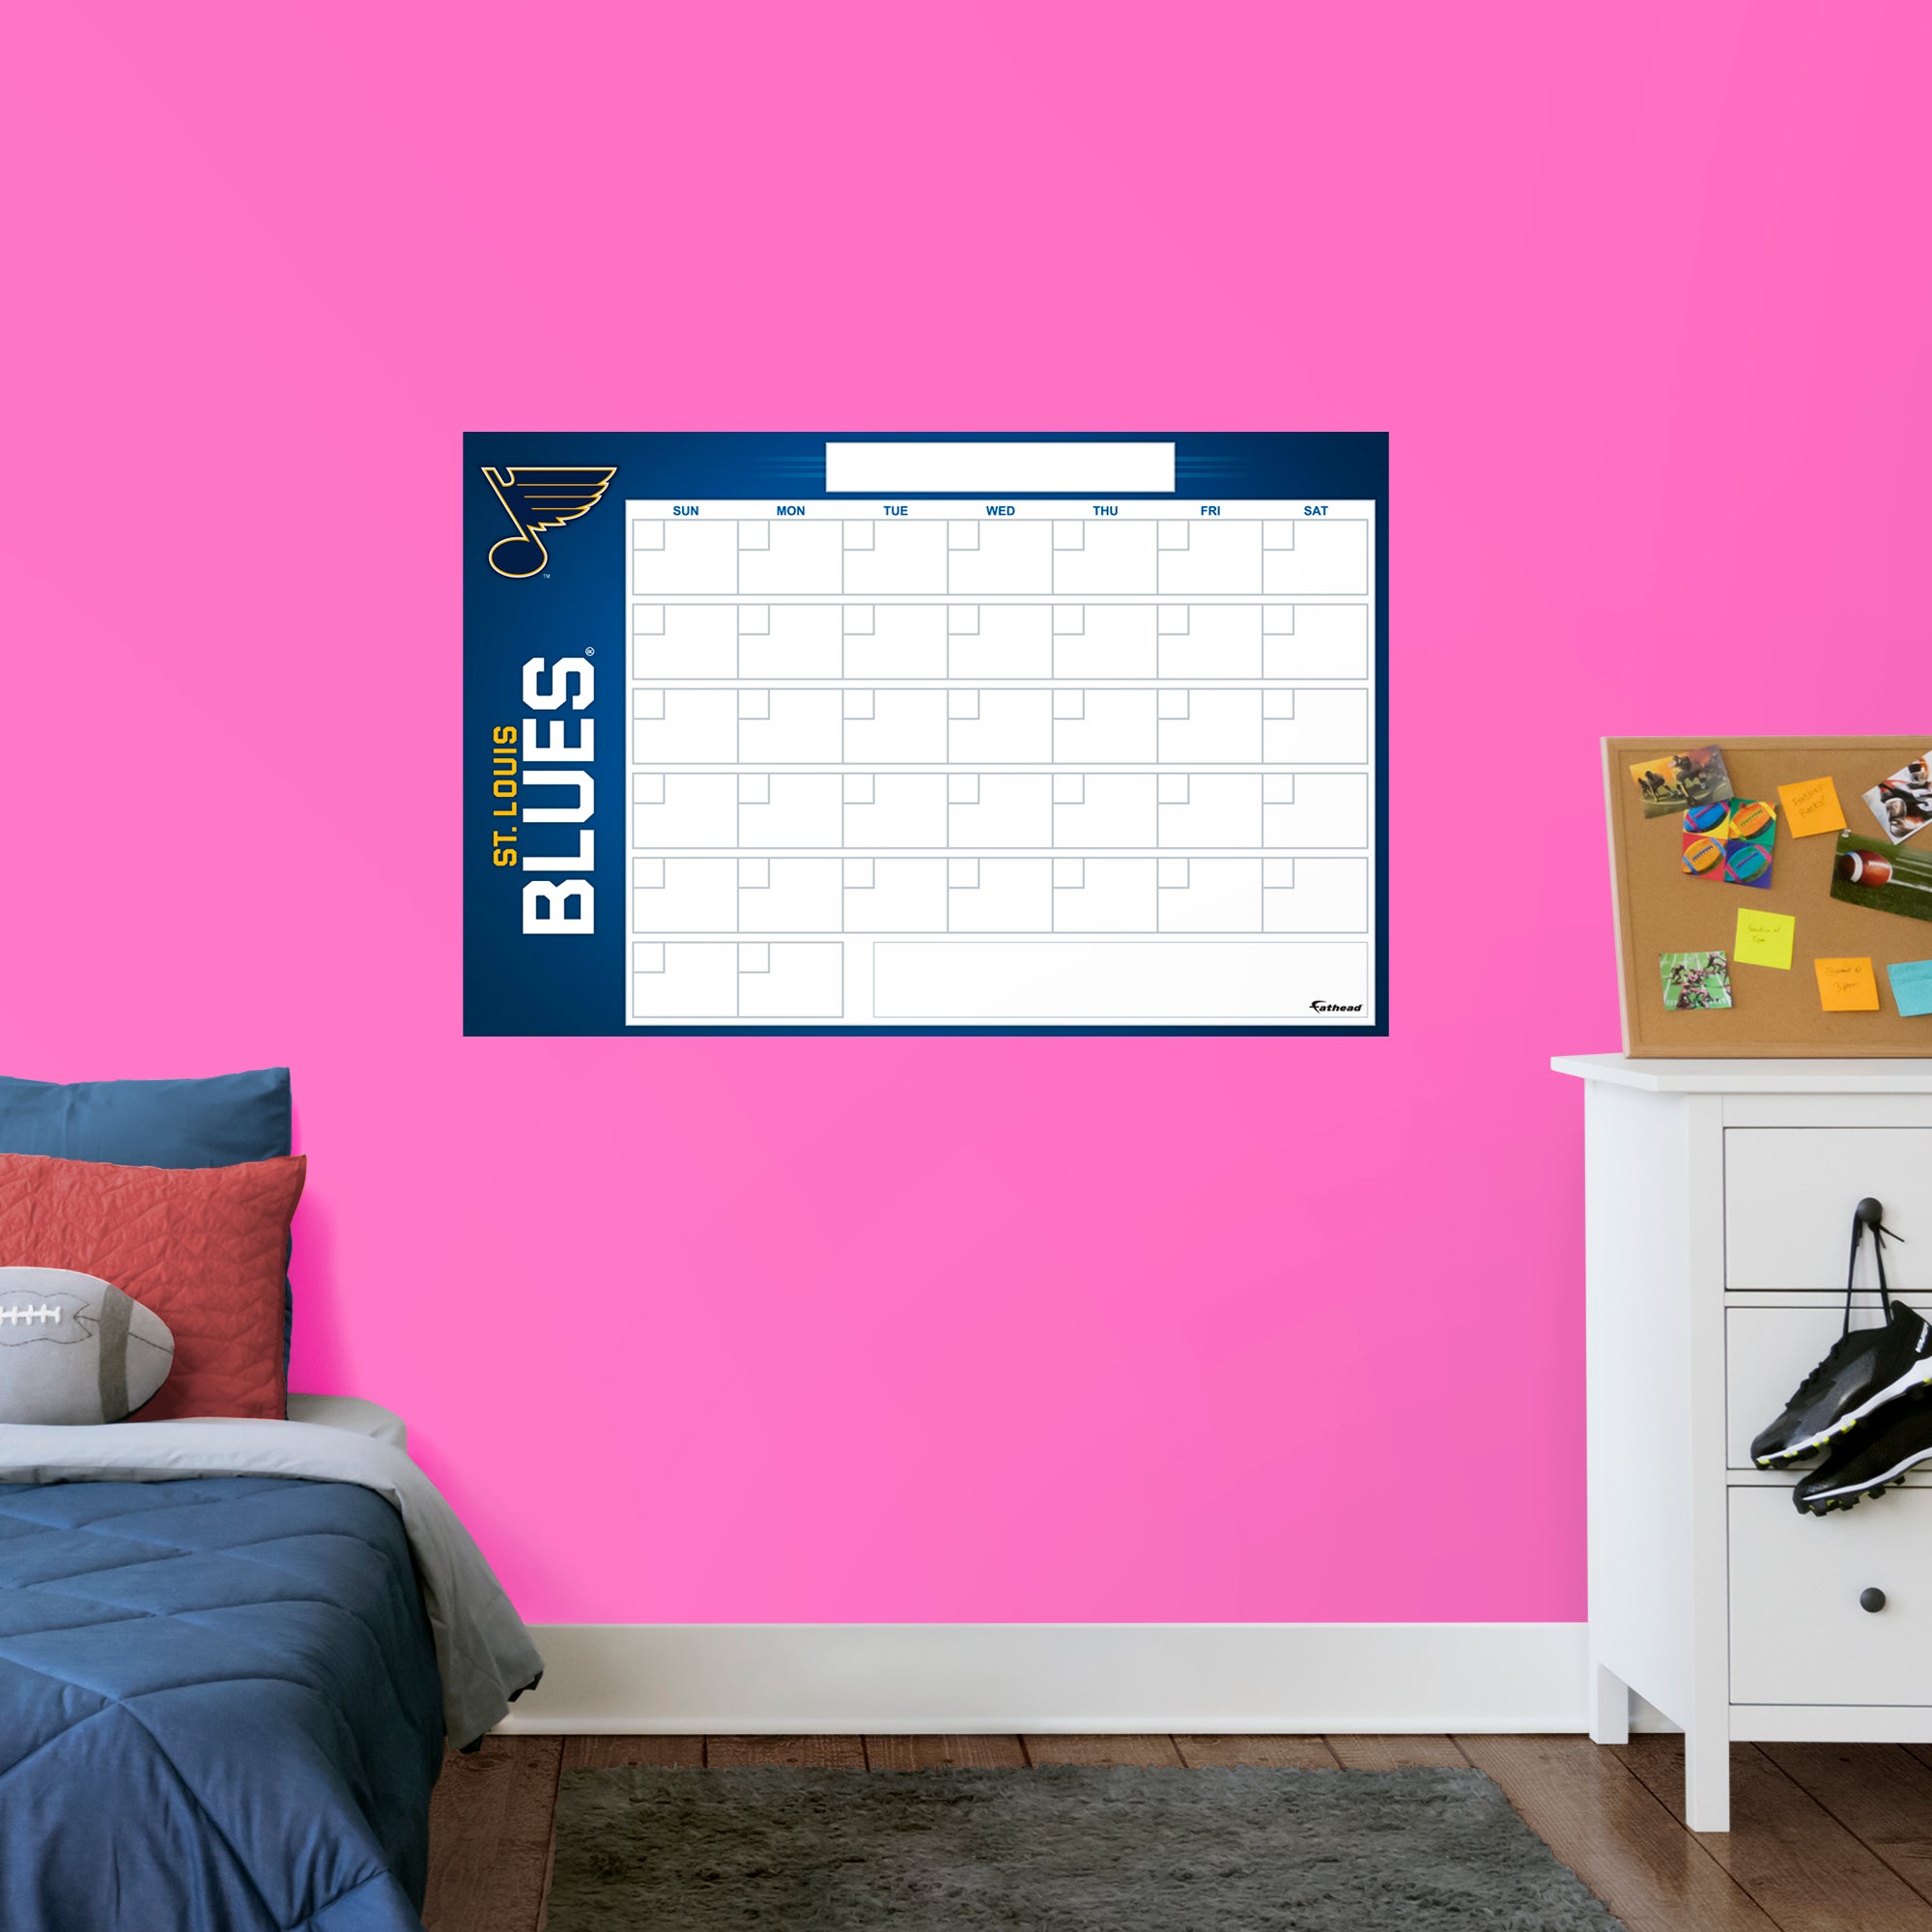 St. Louis Blues Dry Erase Calendar - Officially Licensed NHL Removable Wall Decal Giant Decal (57"W x 34"H) by Fathead | Vinyl